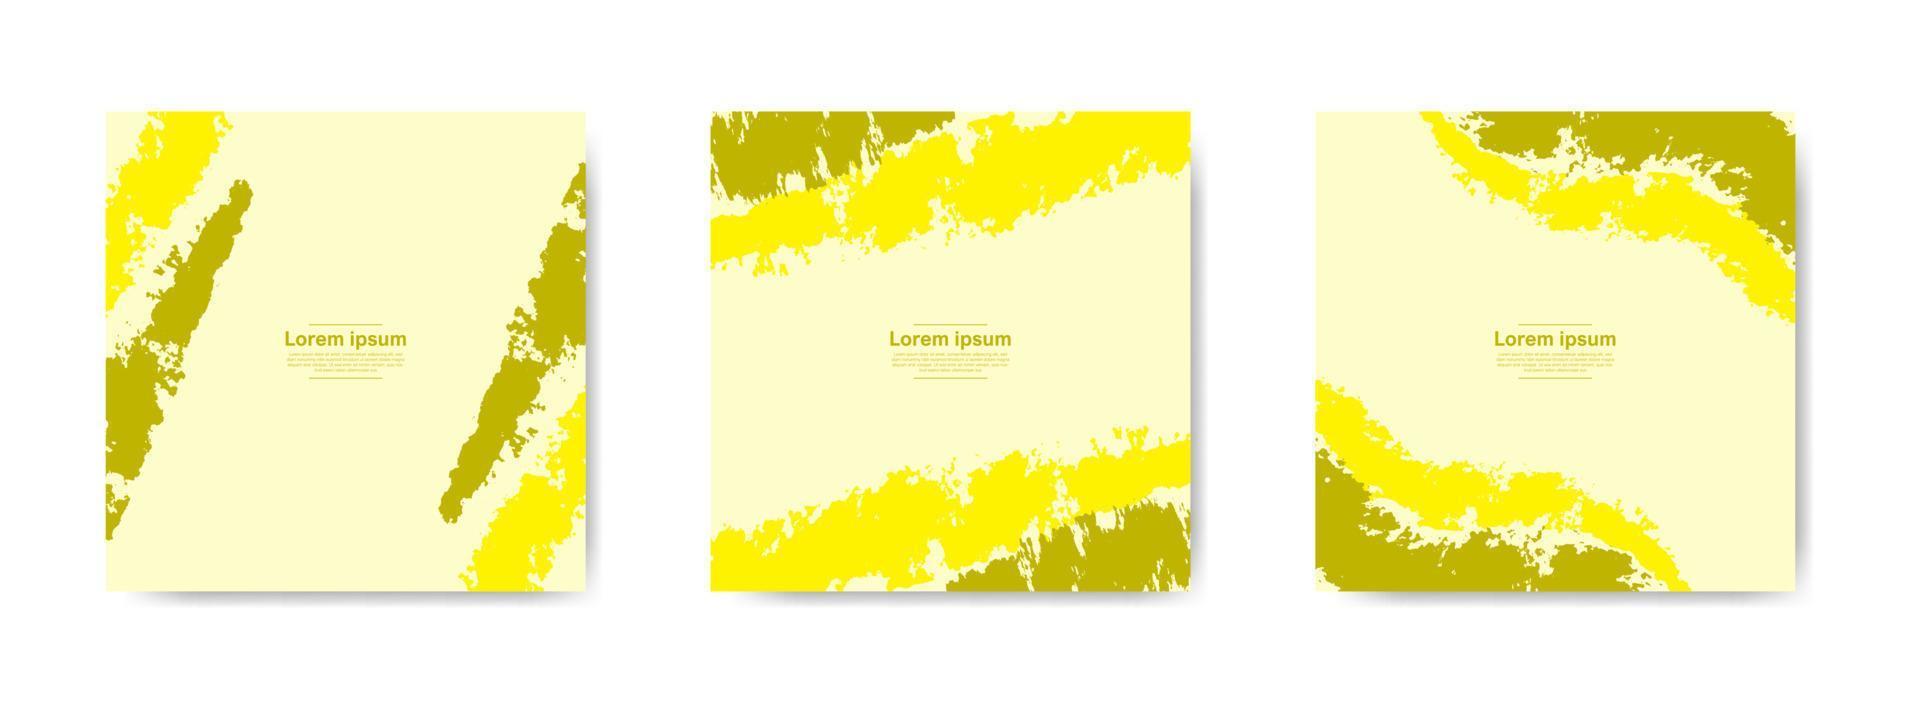 Yellow abstract grunge banner collection for social media post and stories vector